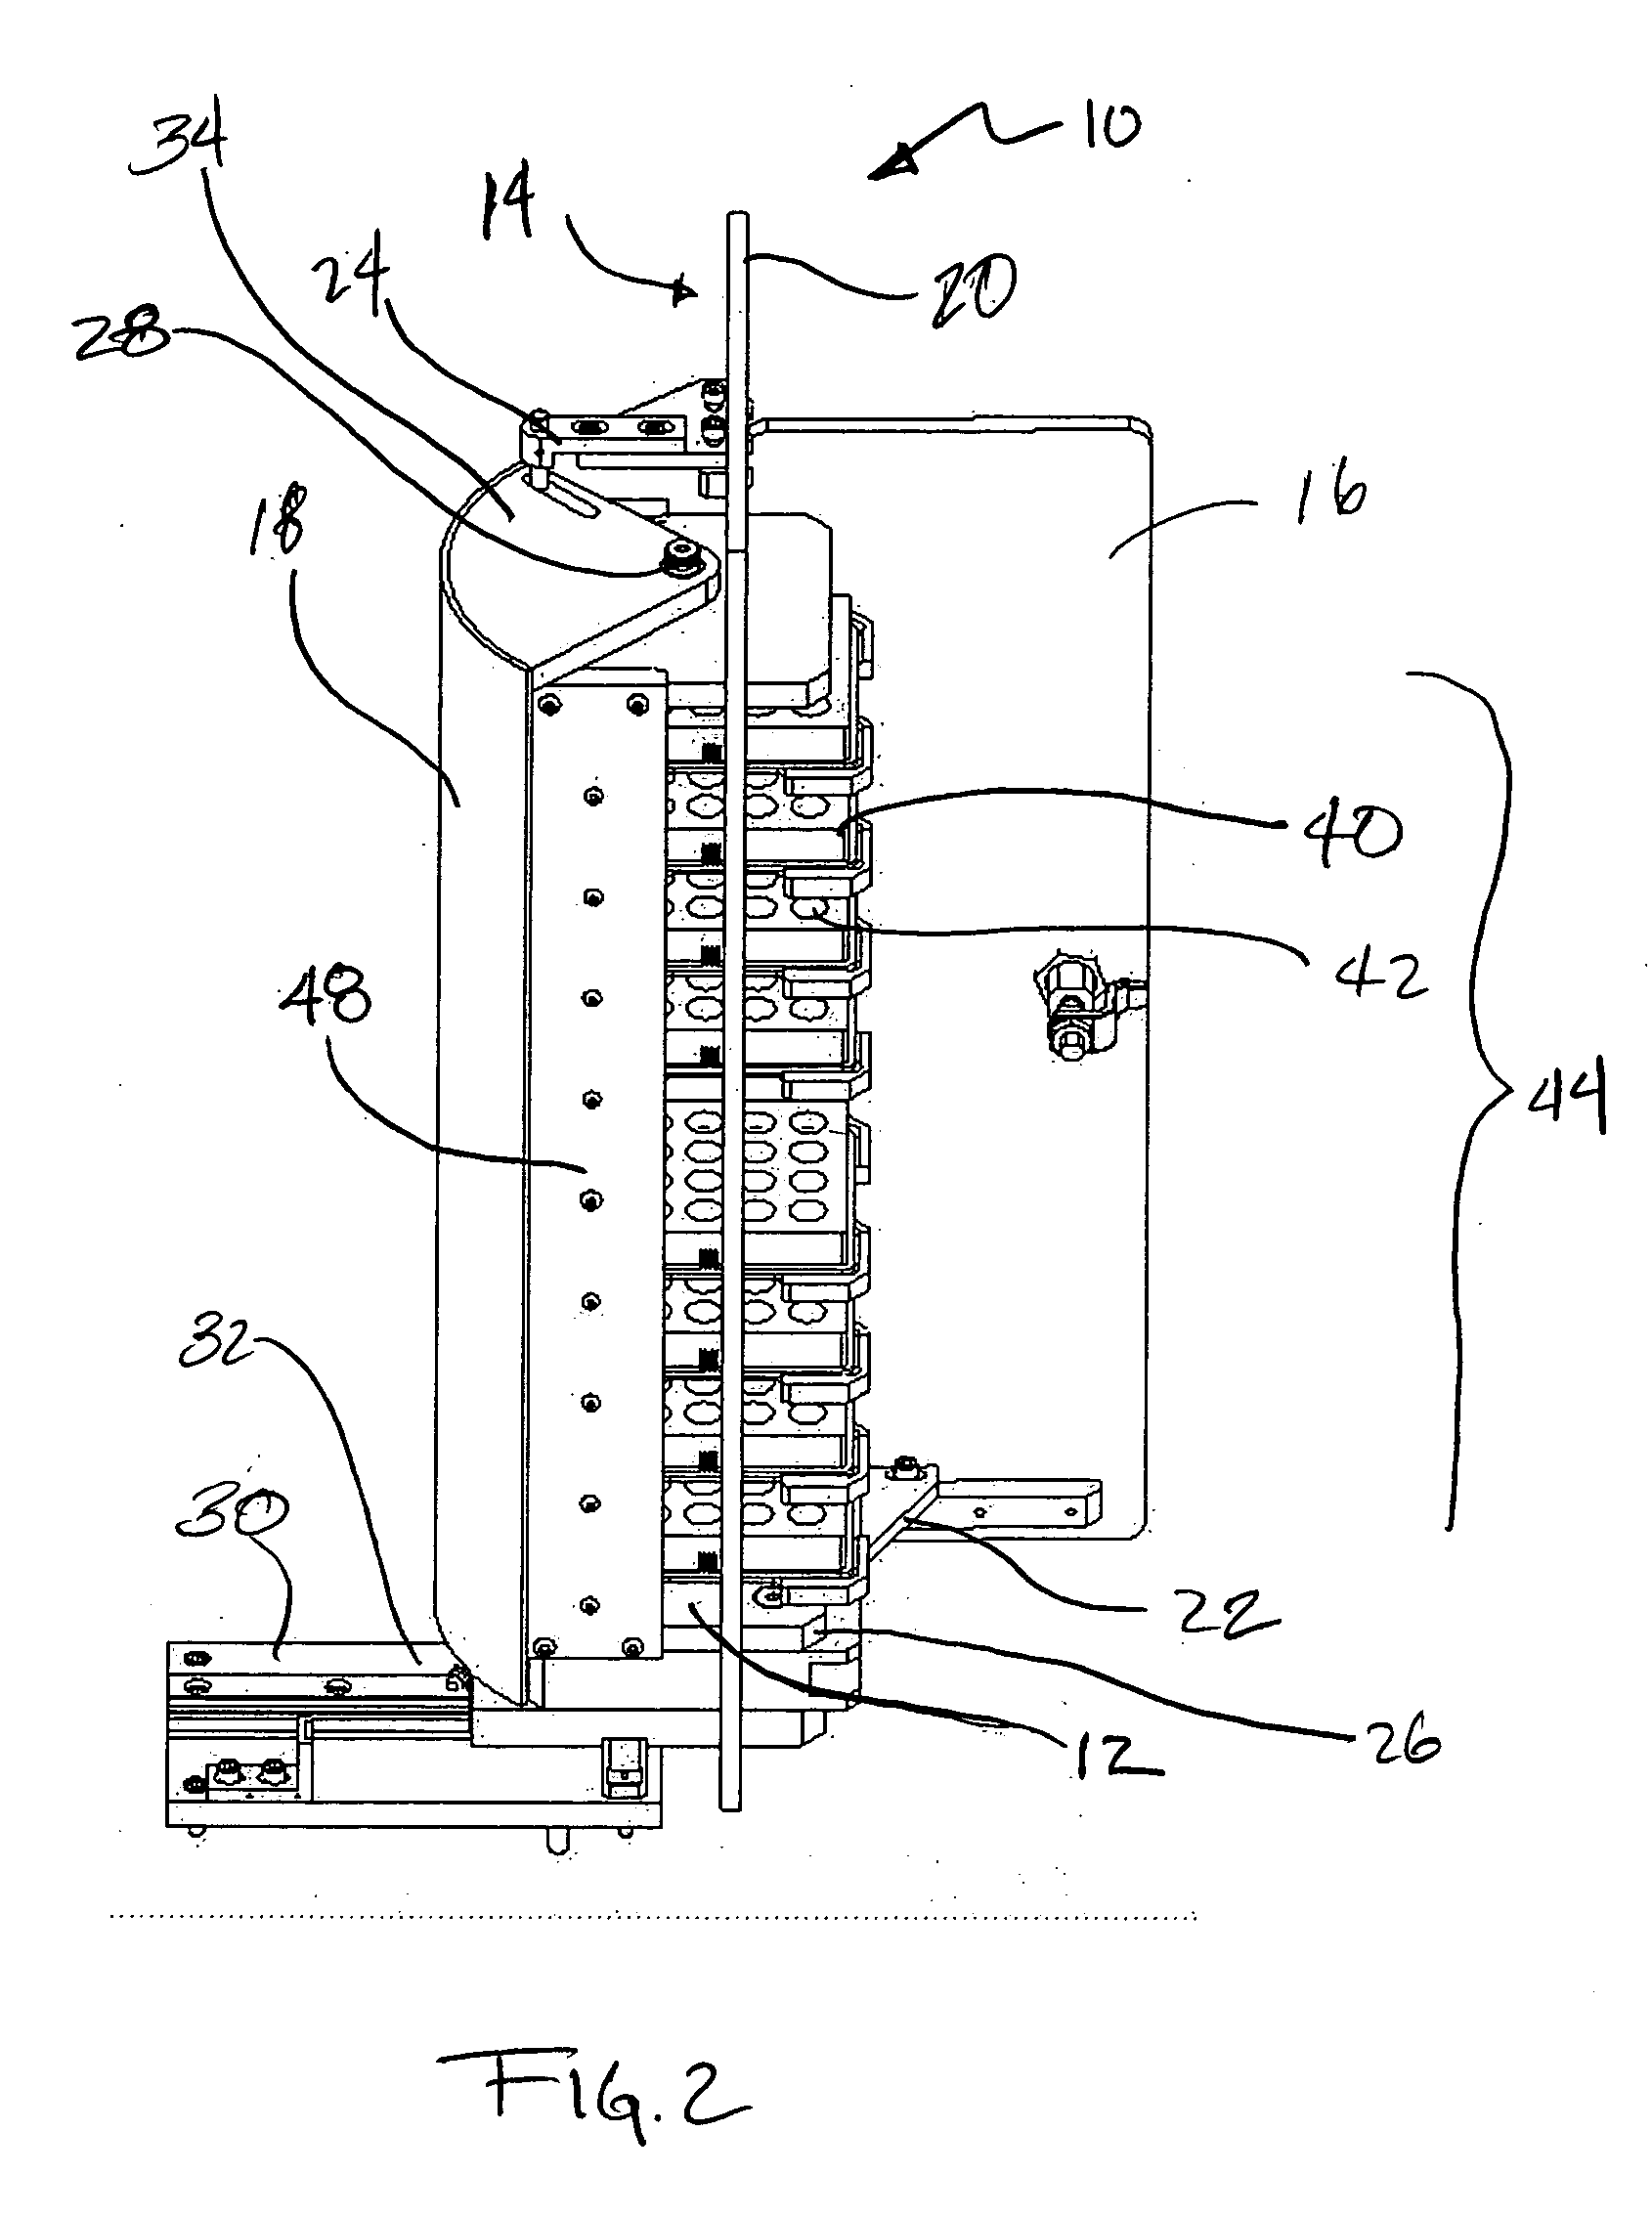 Method and apparatus for accessing a plate storage device